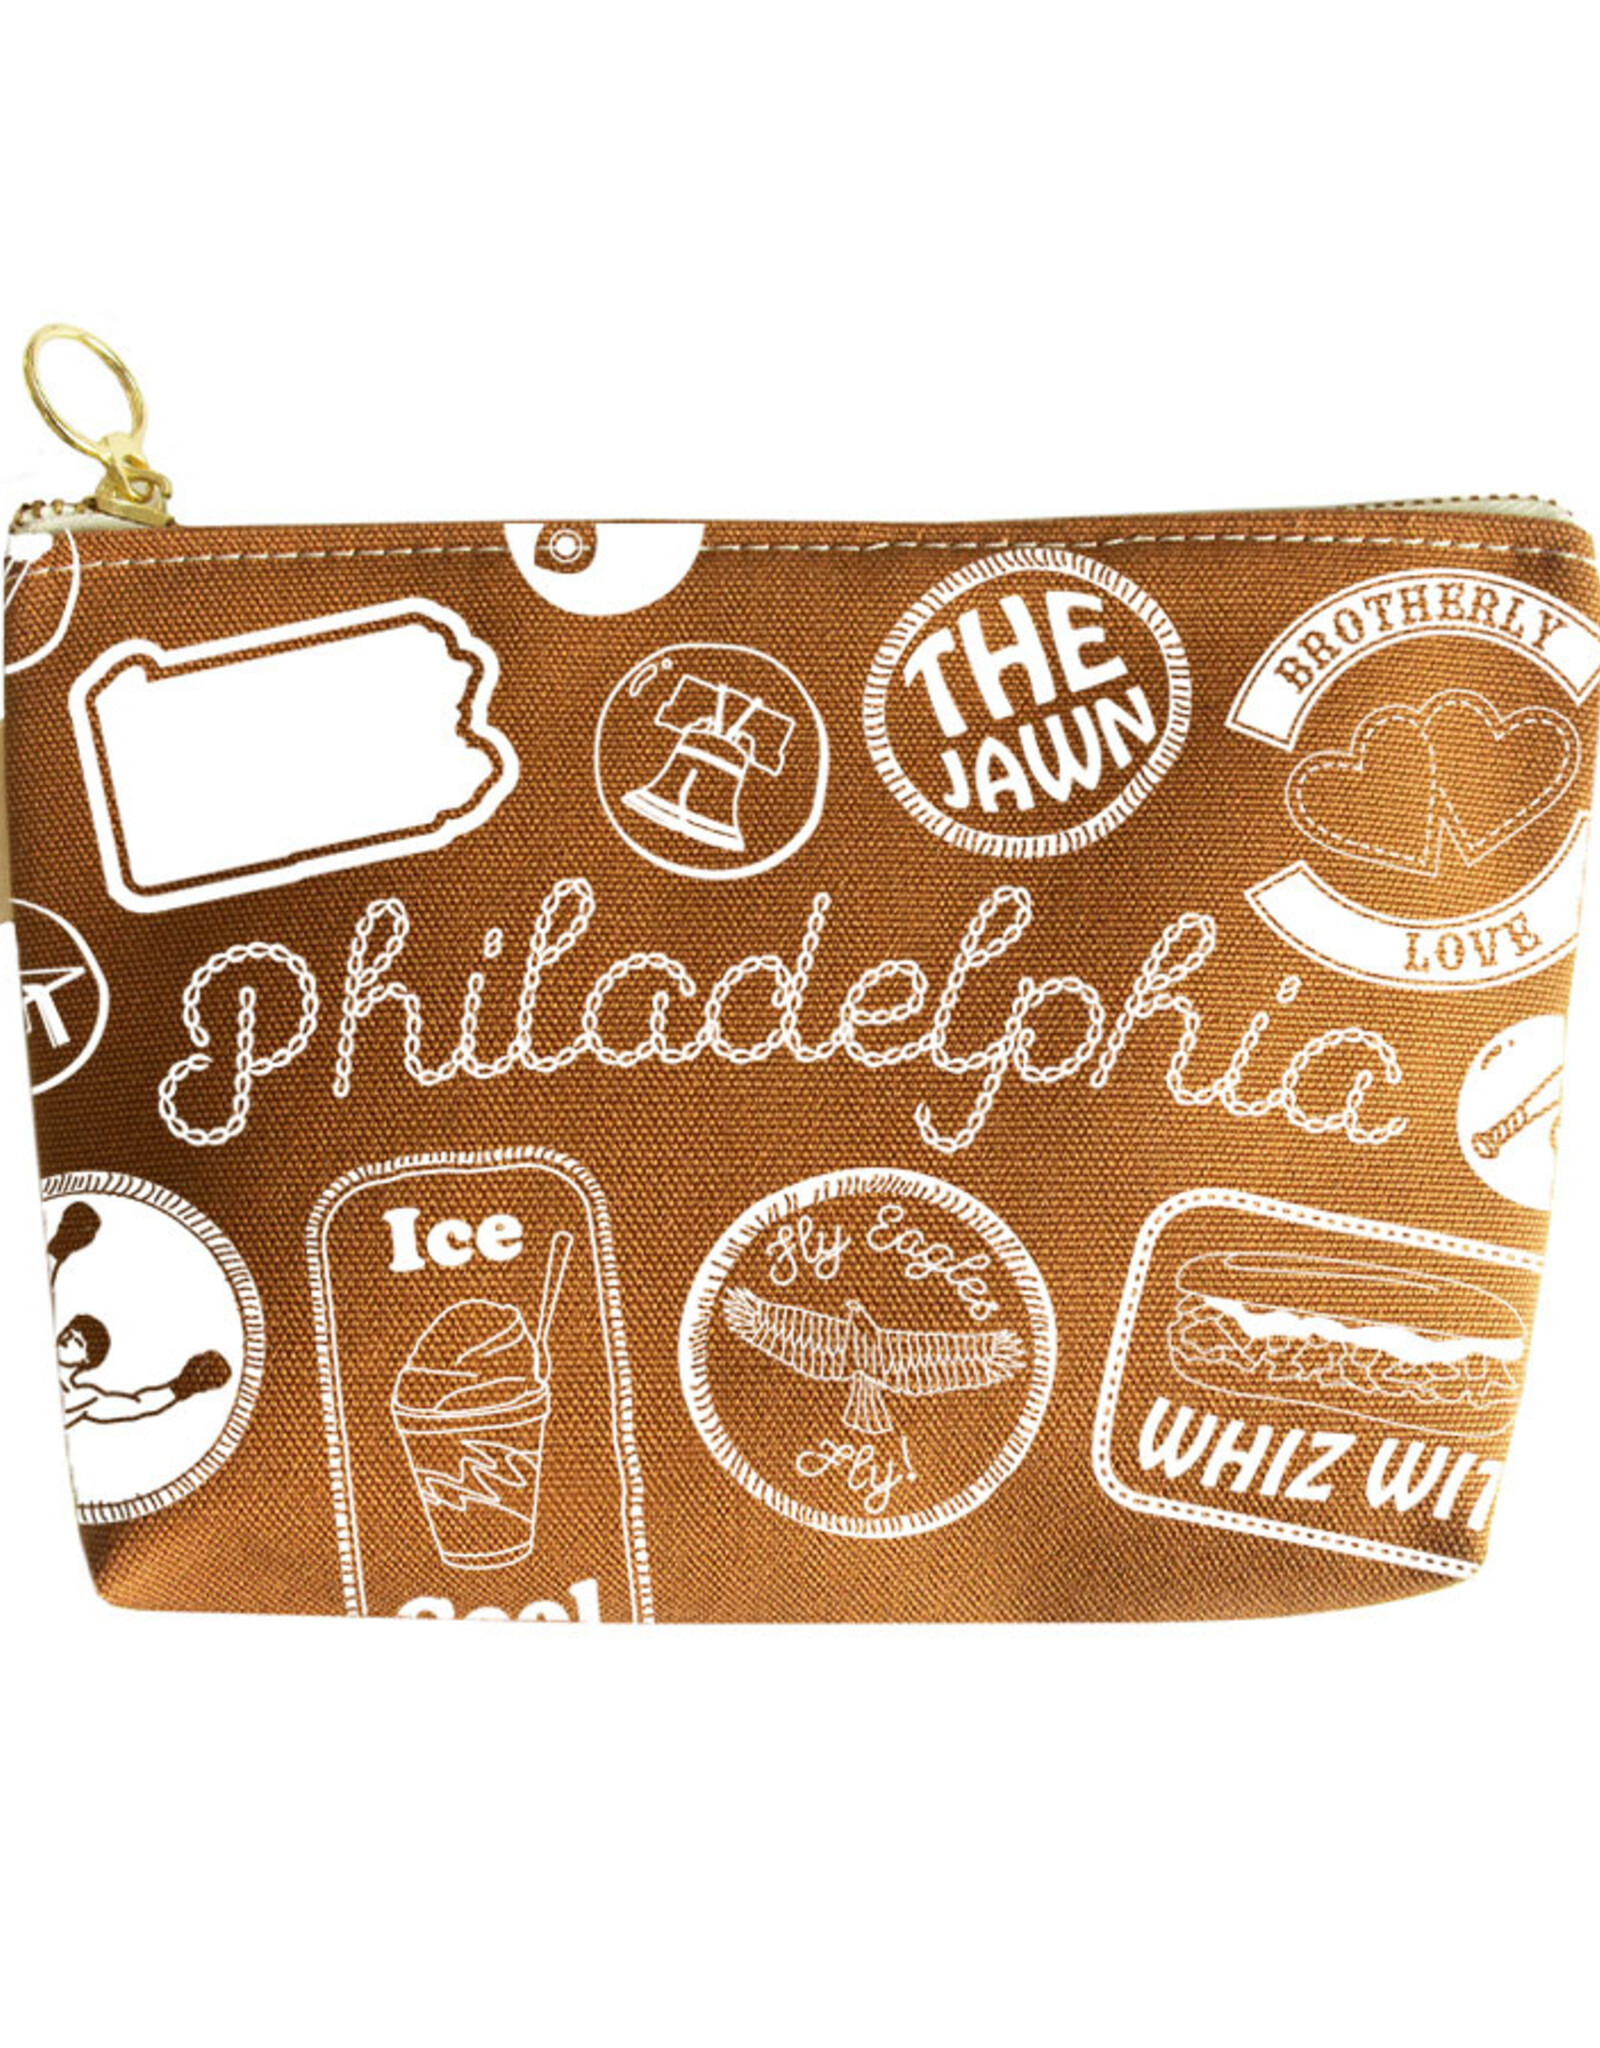 MapTote Philadelphia Pins & Patches Zipped Pouches - Caramel